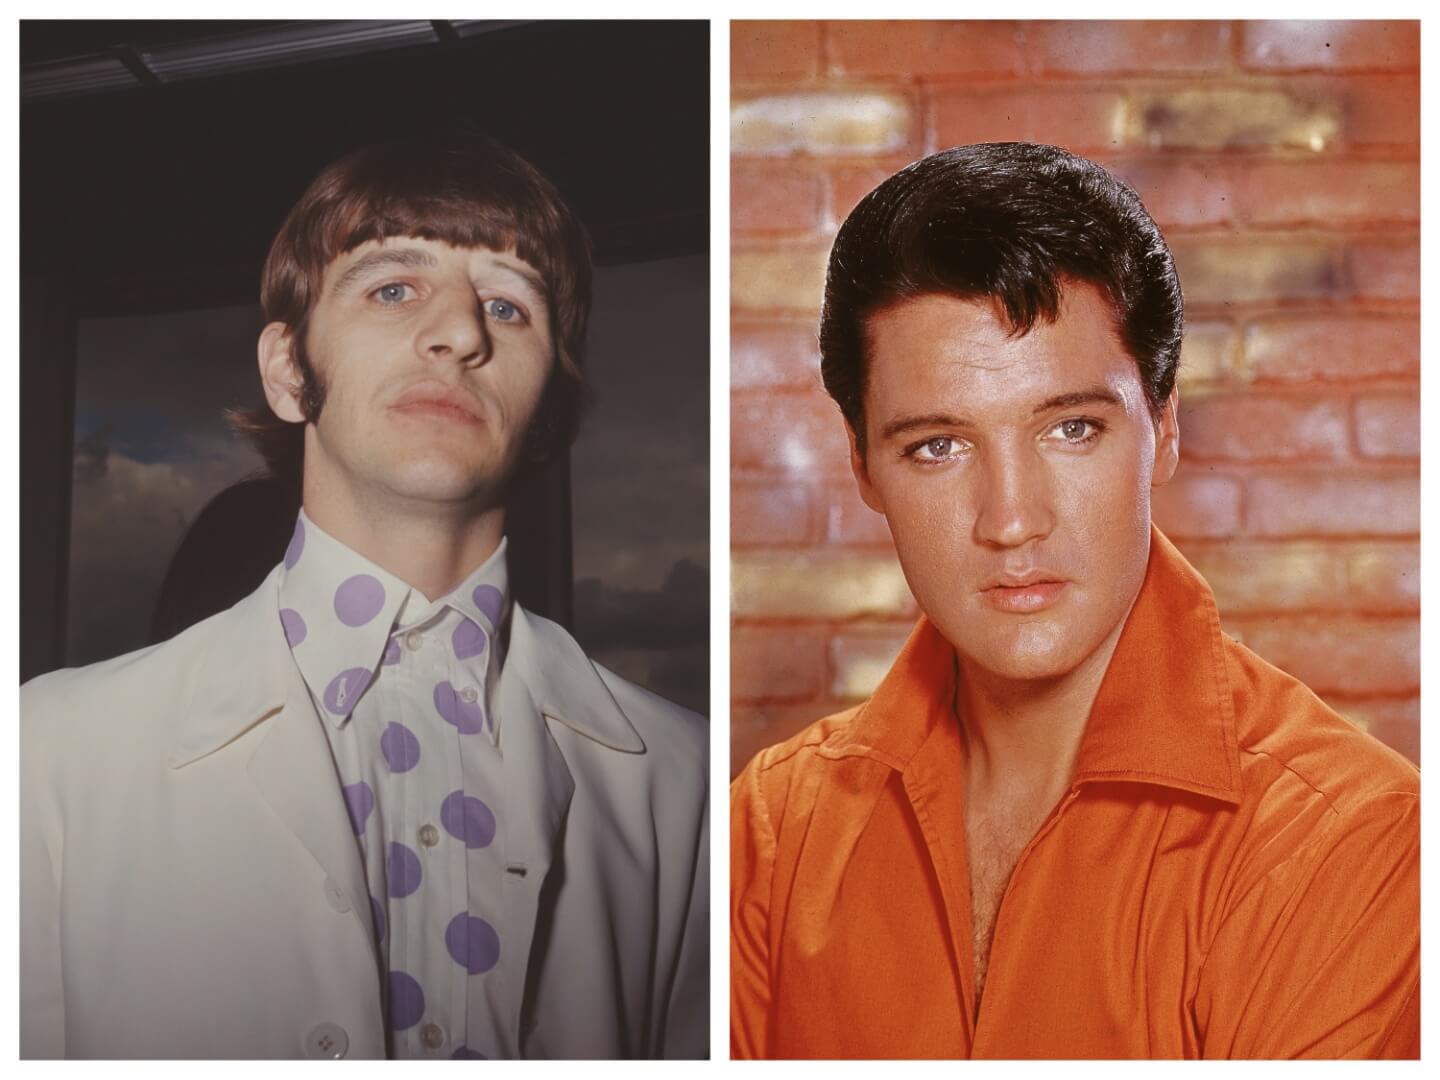 Ringo Starr wears a white shirt with purple polka dots and a white jacket. Elvis Presley wears an orange shirt in front of a brick wall.